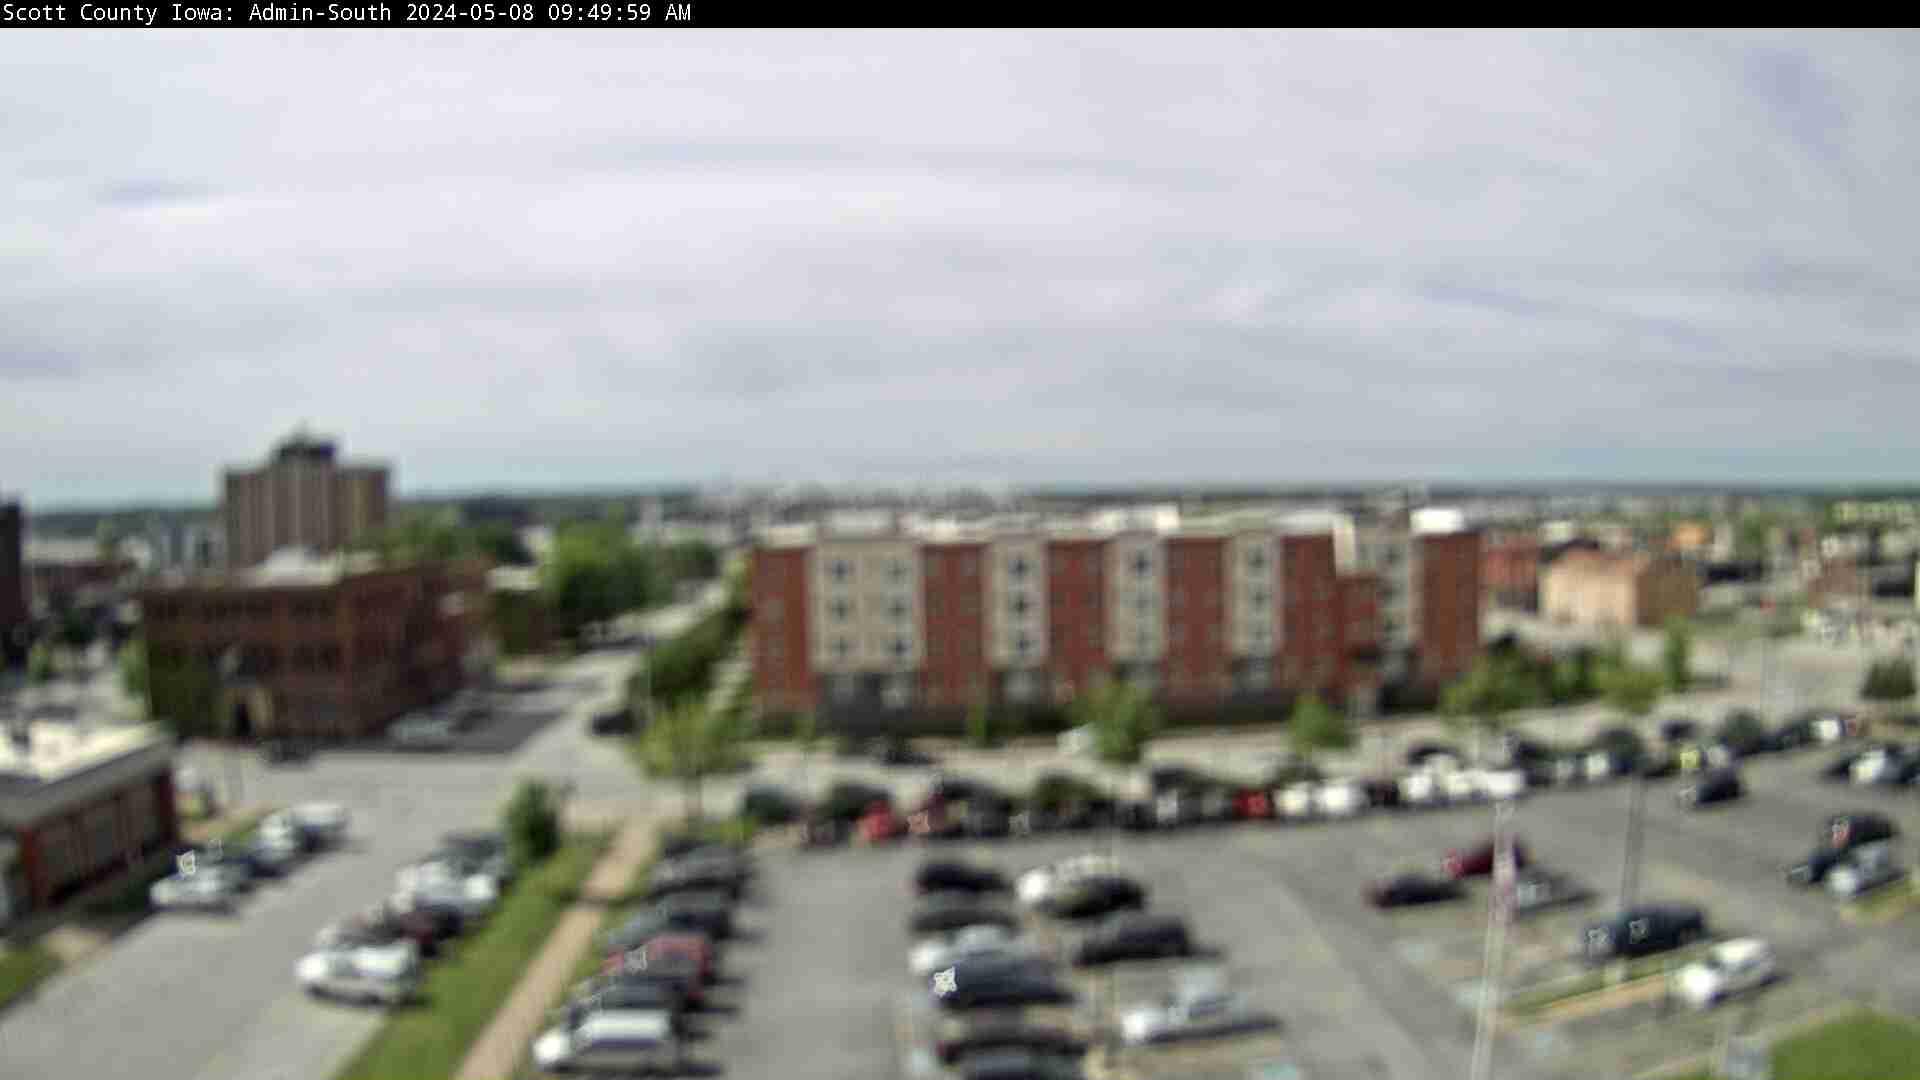 Webcam view from Admin Center looking south.